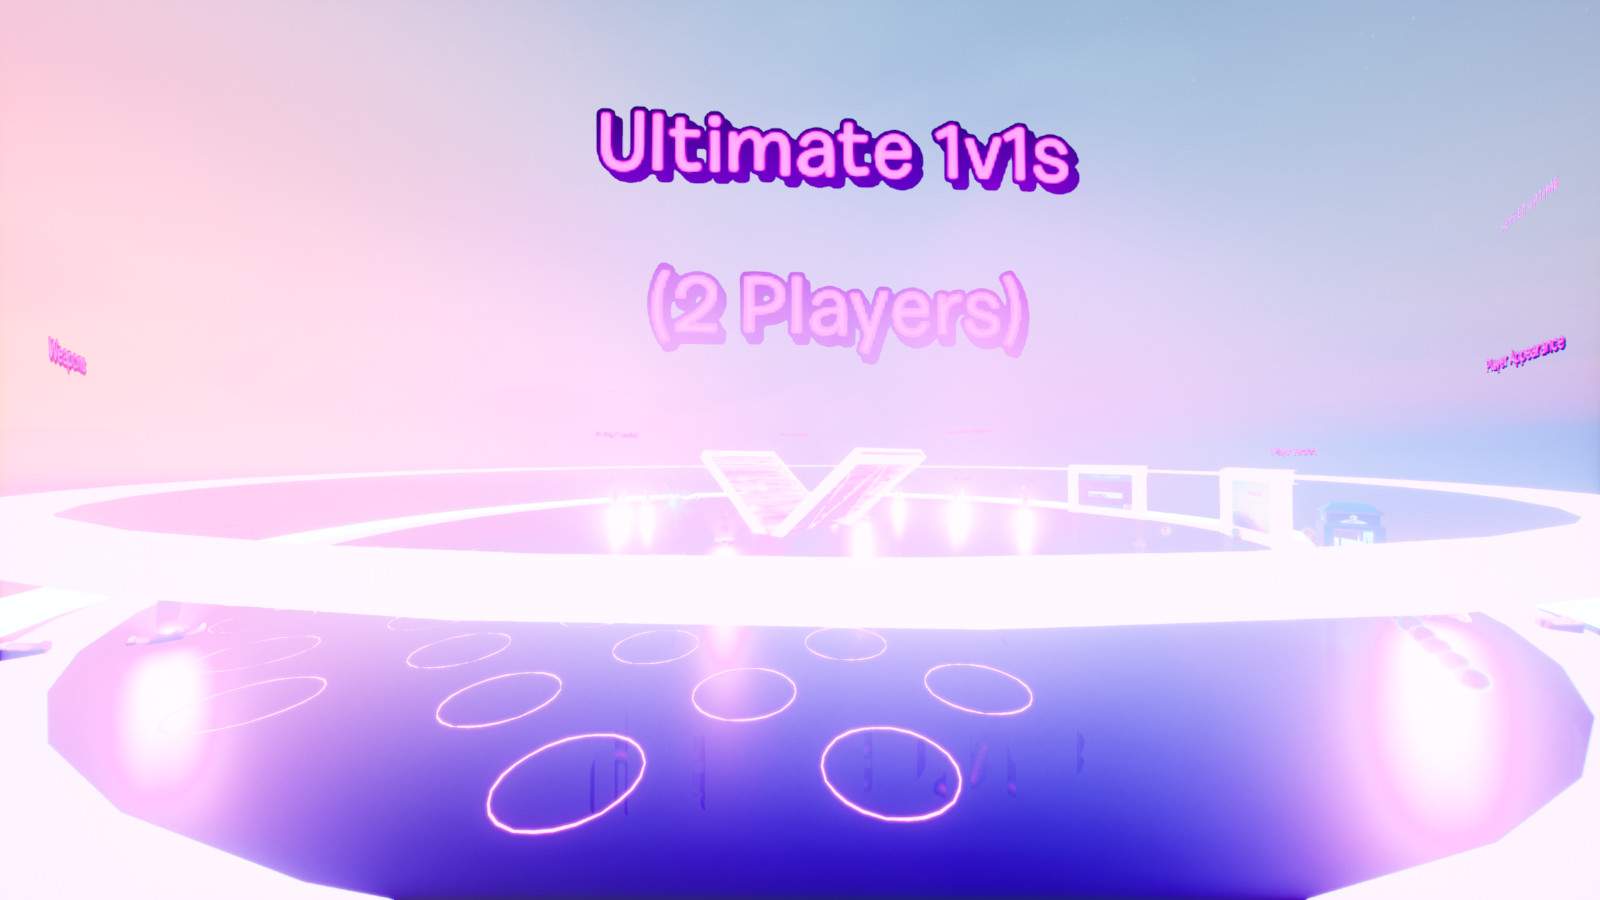 ✅ULTIMATE 1V1S (2 PLAYERS)✅